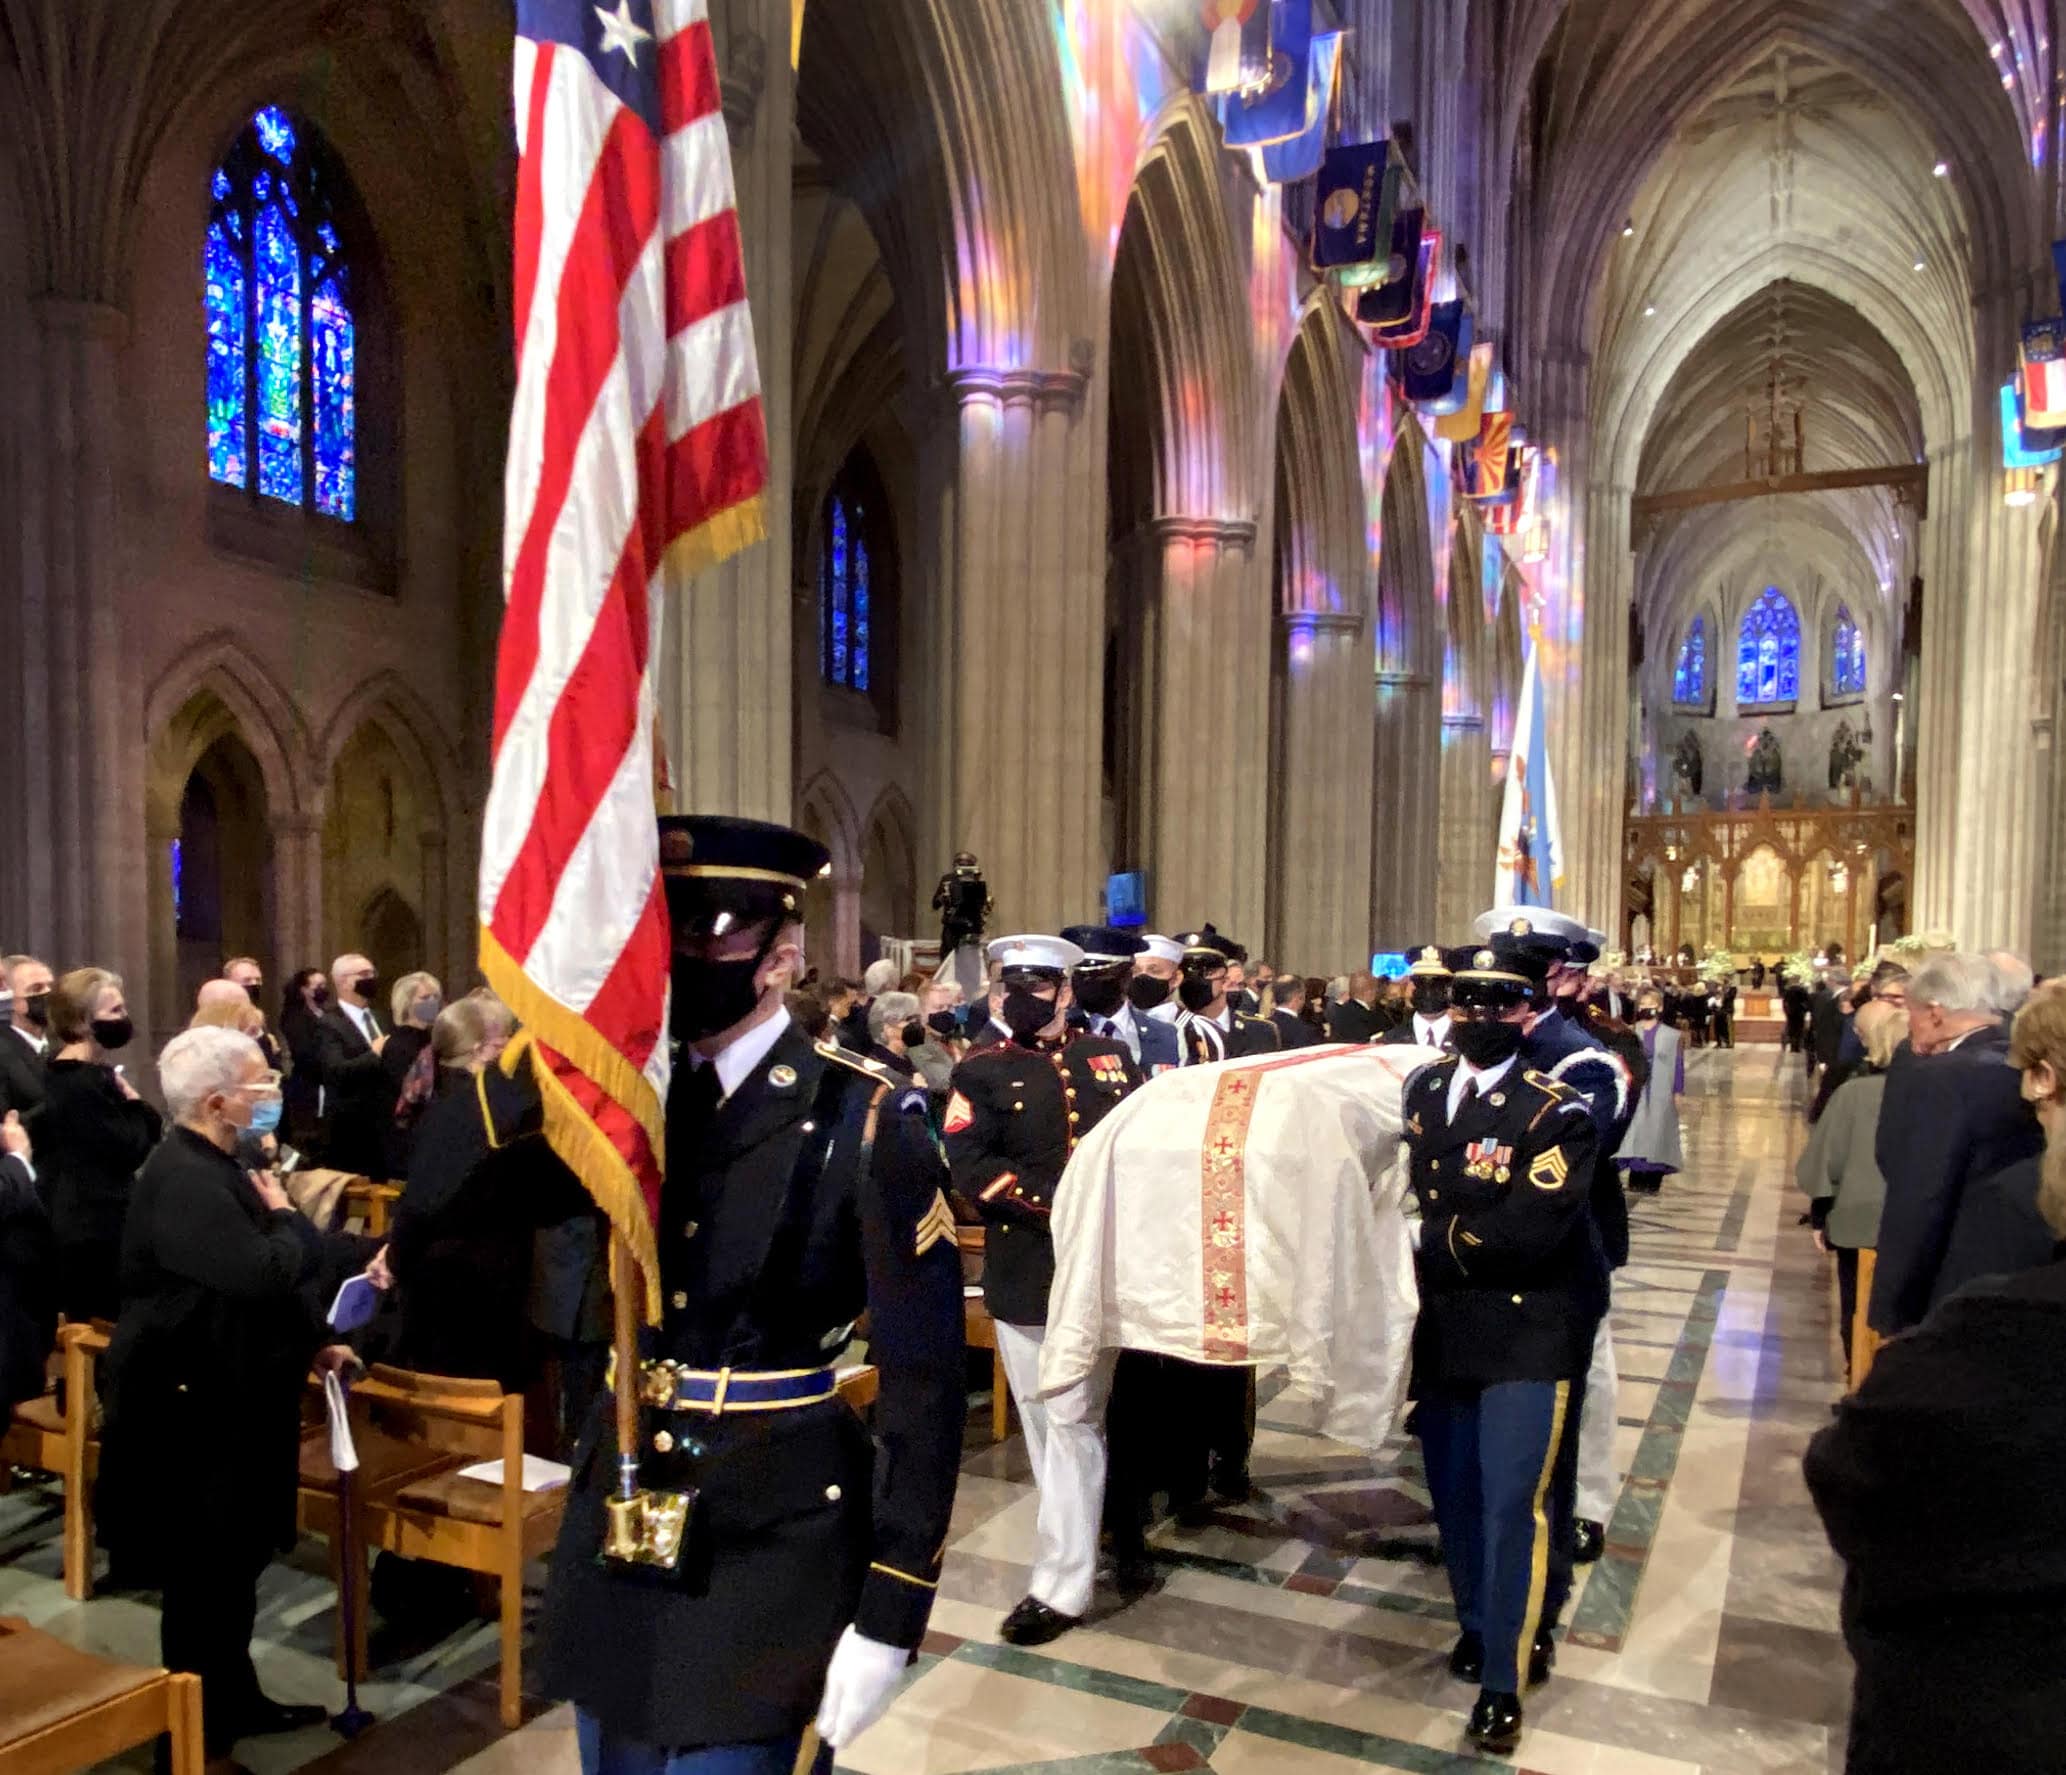 Final farewell. General Colin Powell is carried from the Washington National Cathedral by members of his beloved U.S. Military after his funeral service, November 5, 2021